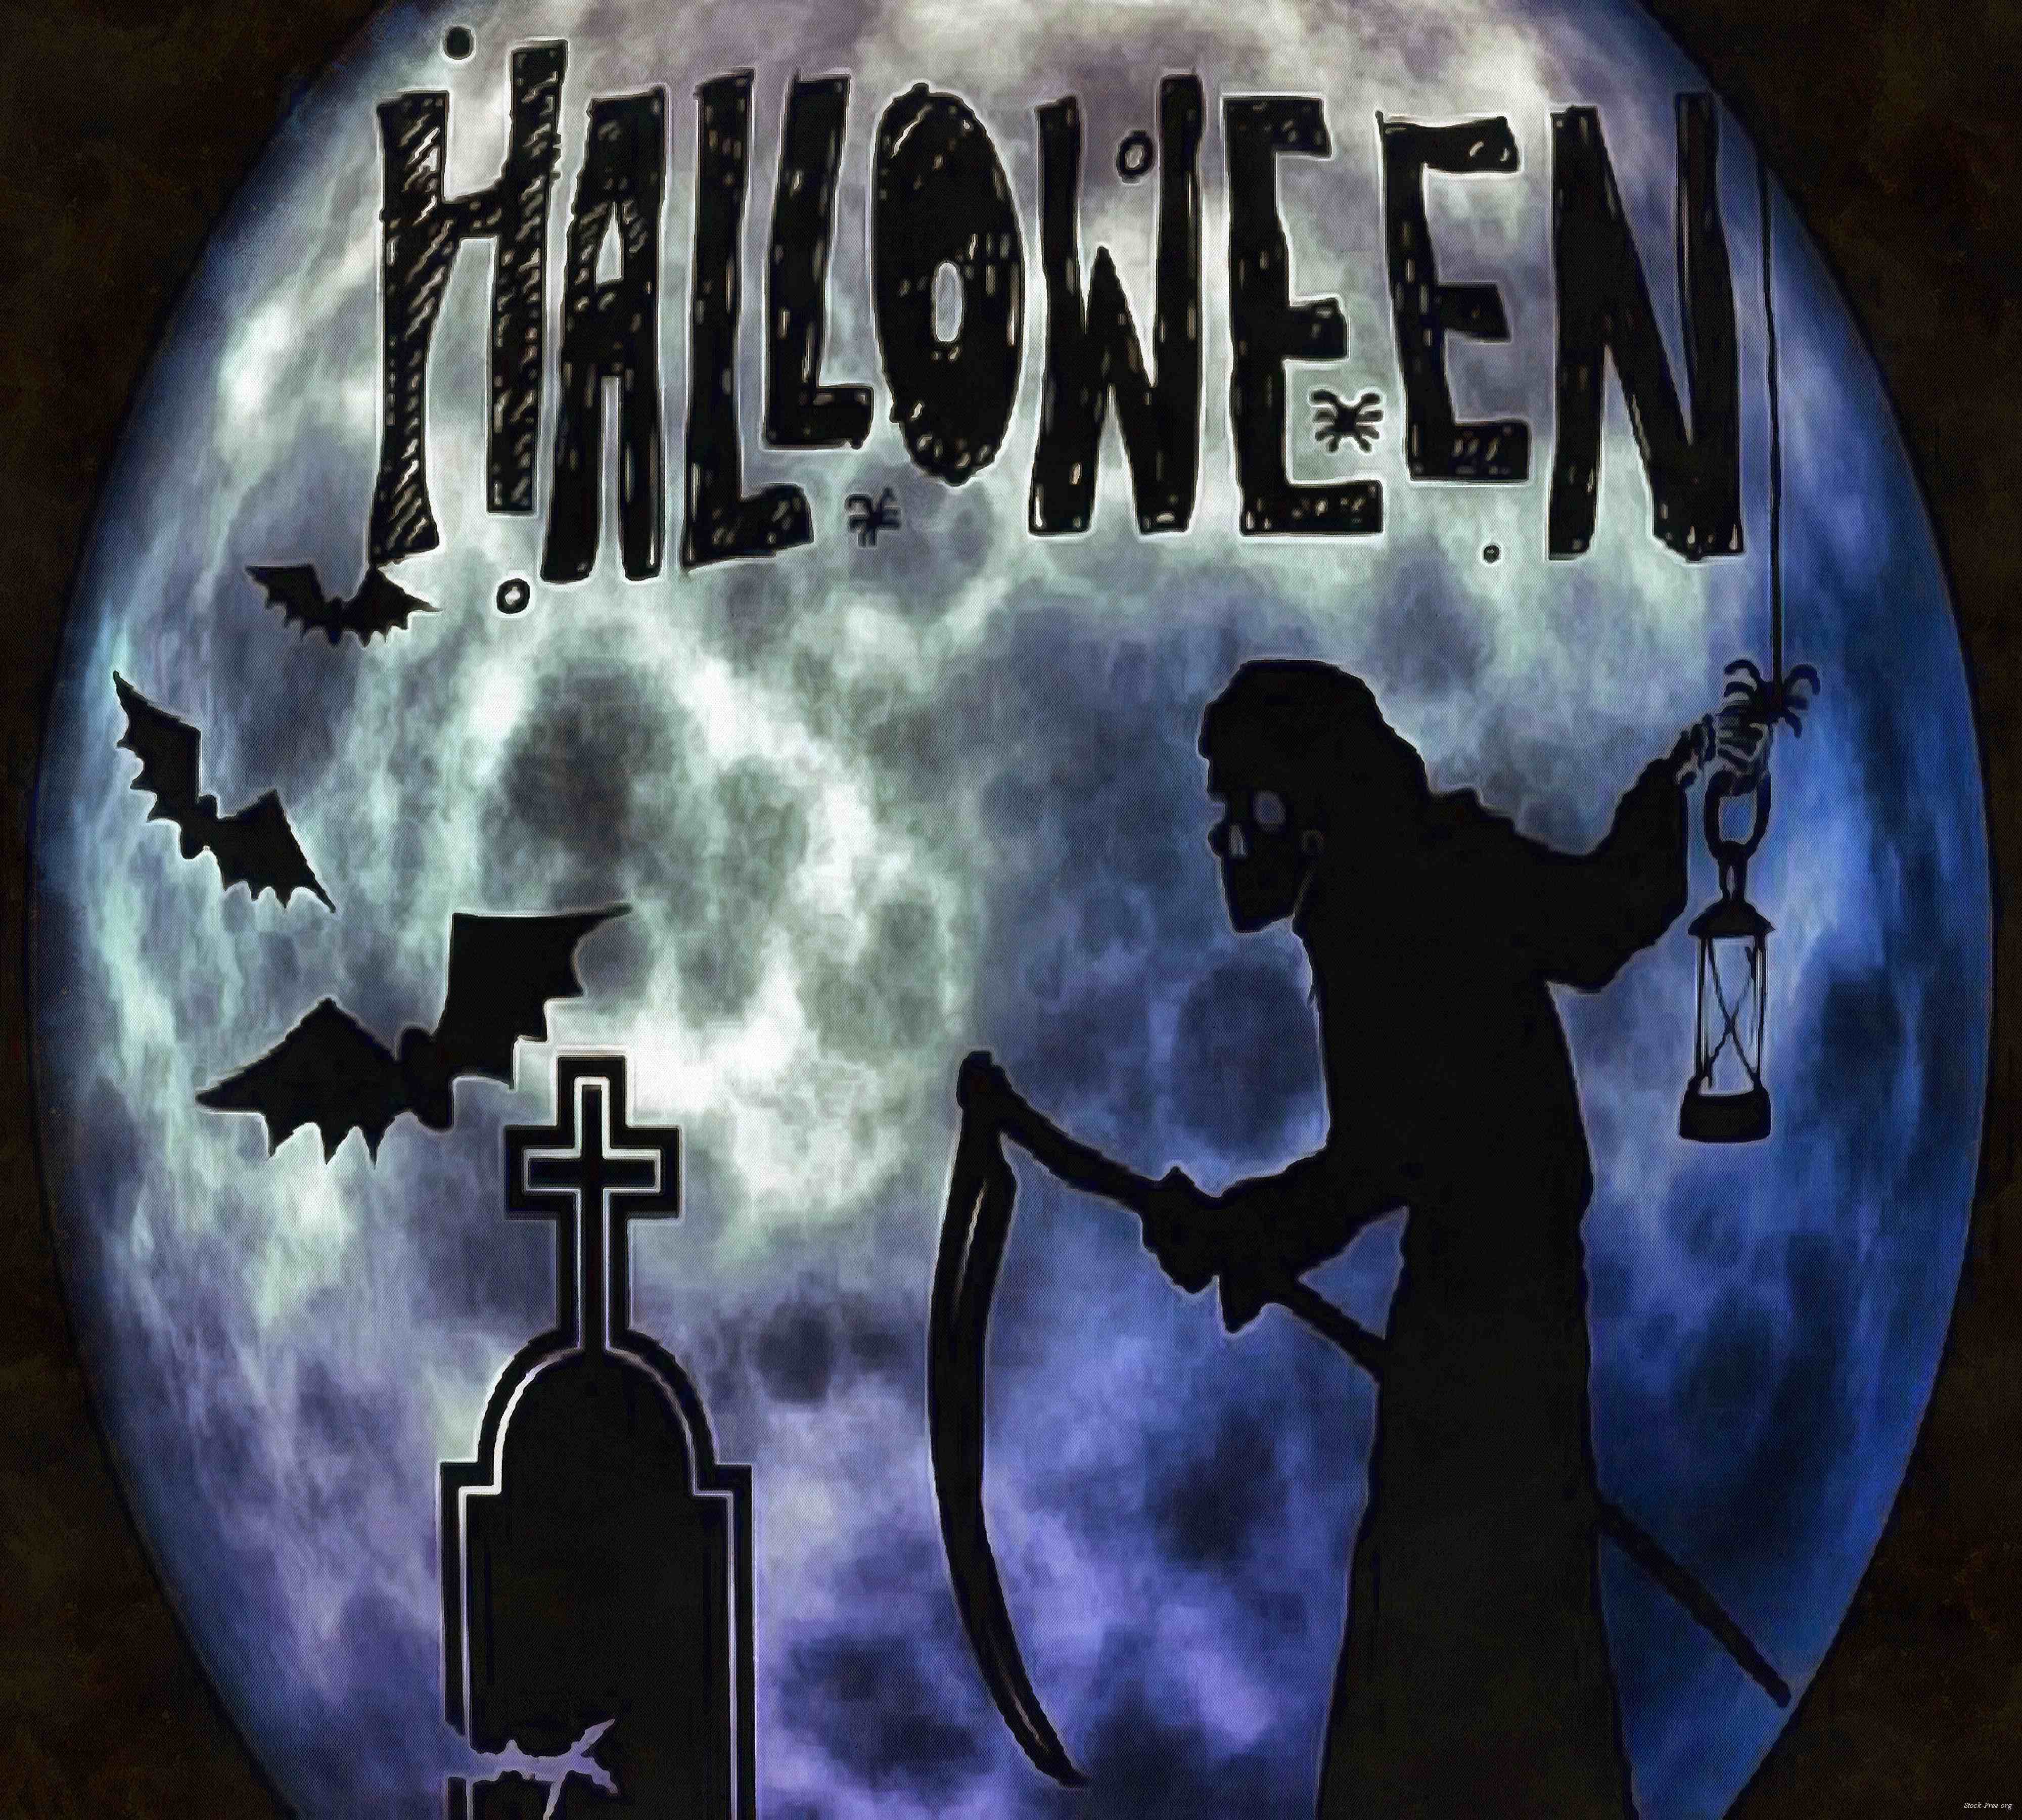 halloween, holiday, moon, happy halloveen, castle, spooky - halloween, free stock photos, public domain images, stock free images, download for free